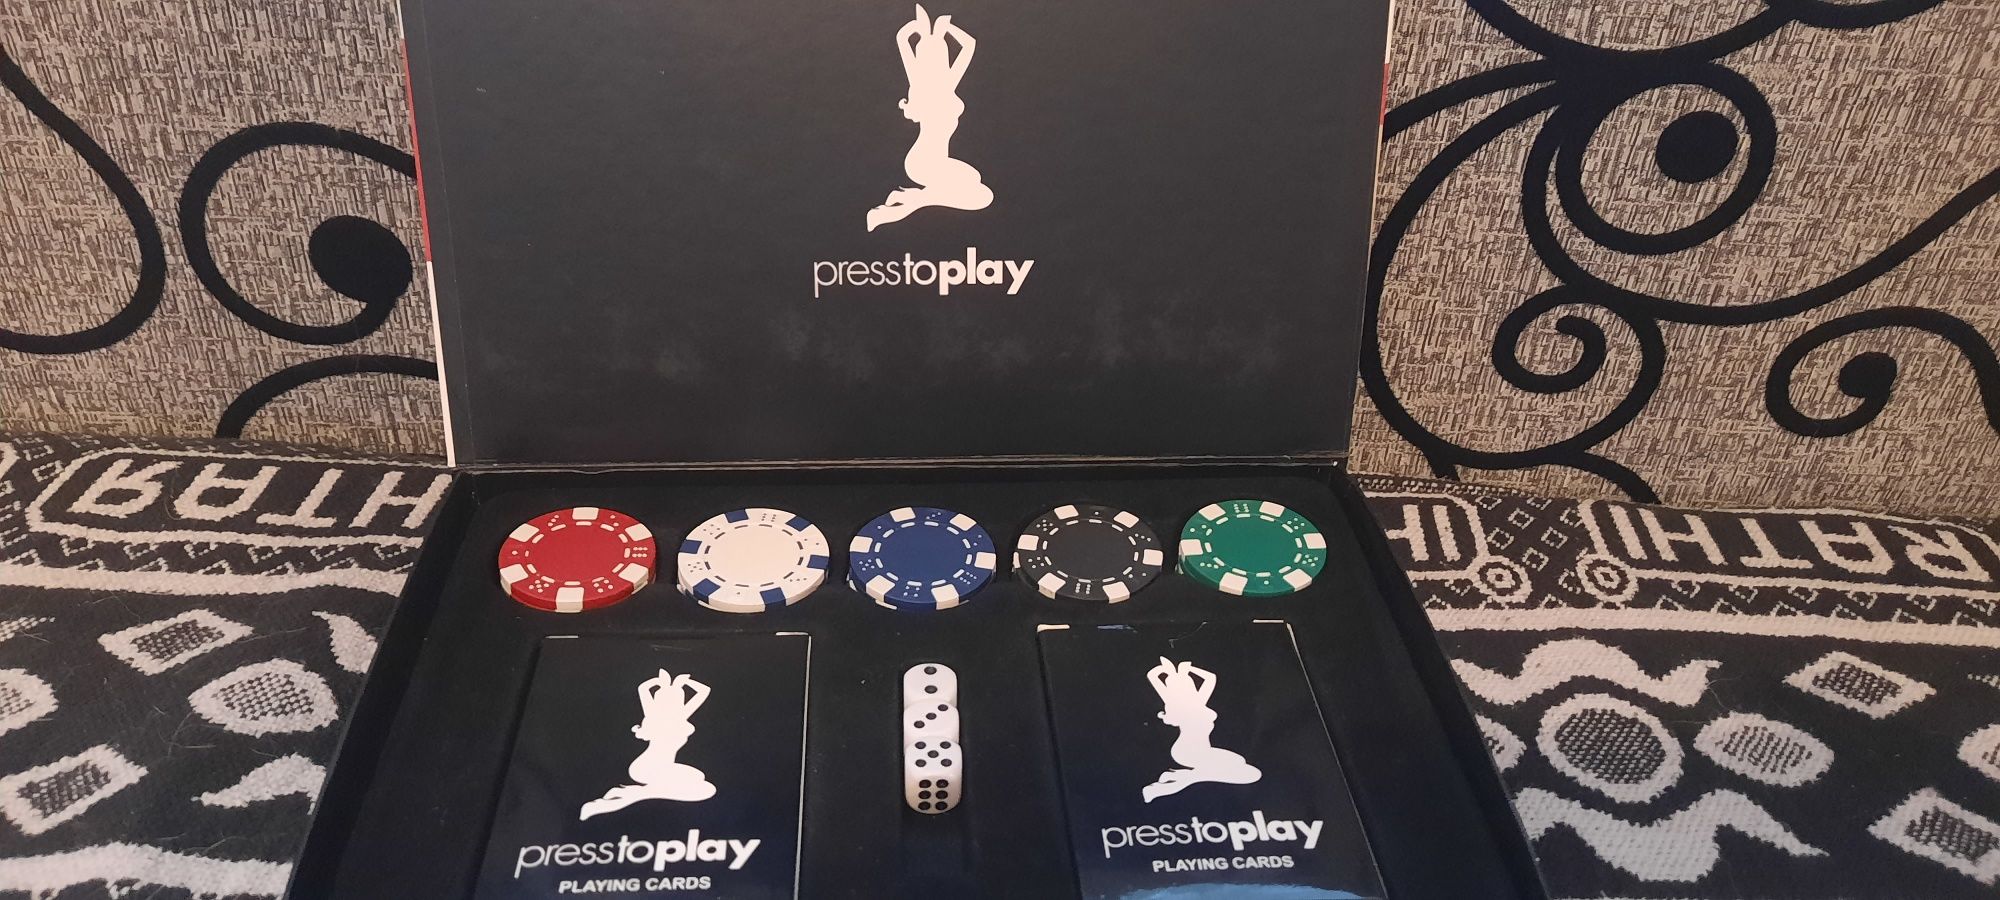 Poker Press to play